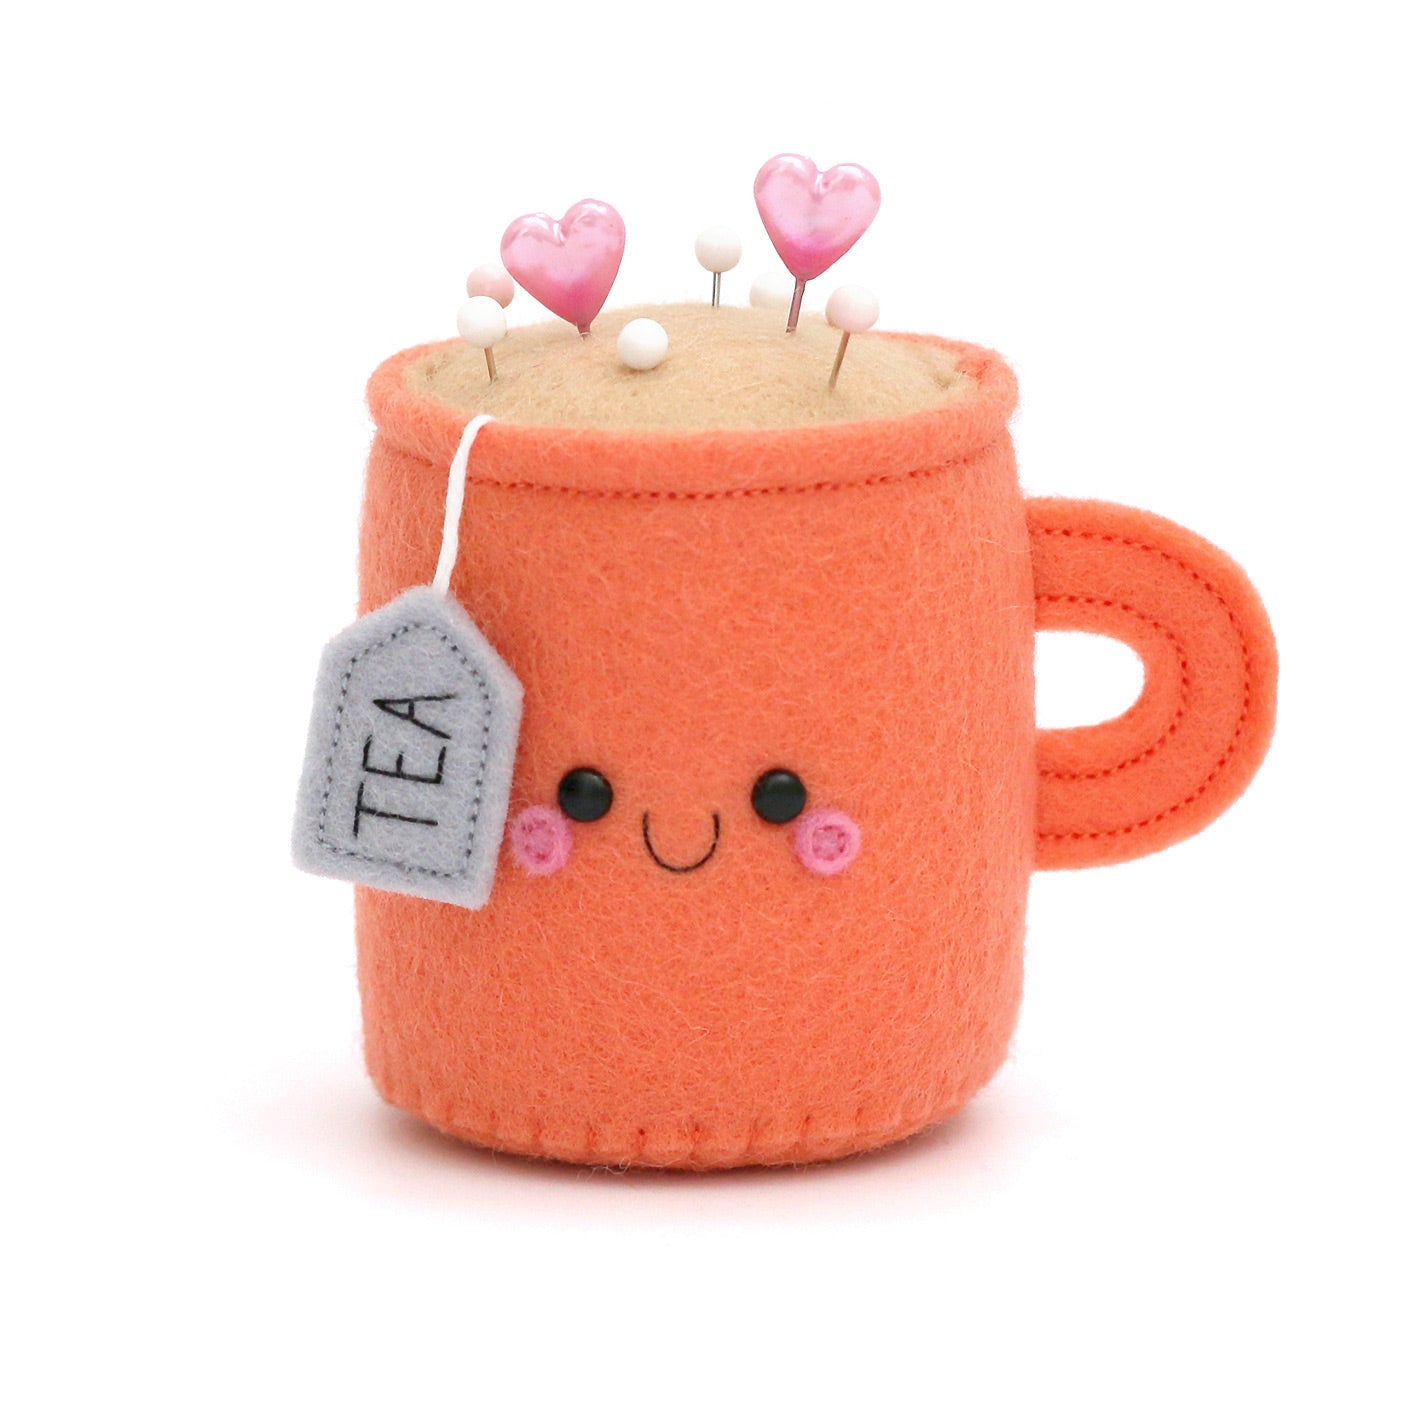 Teacup shaped pincushion in a kawaii style by hannahdoodle